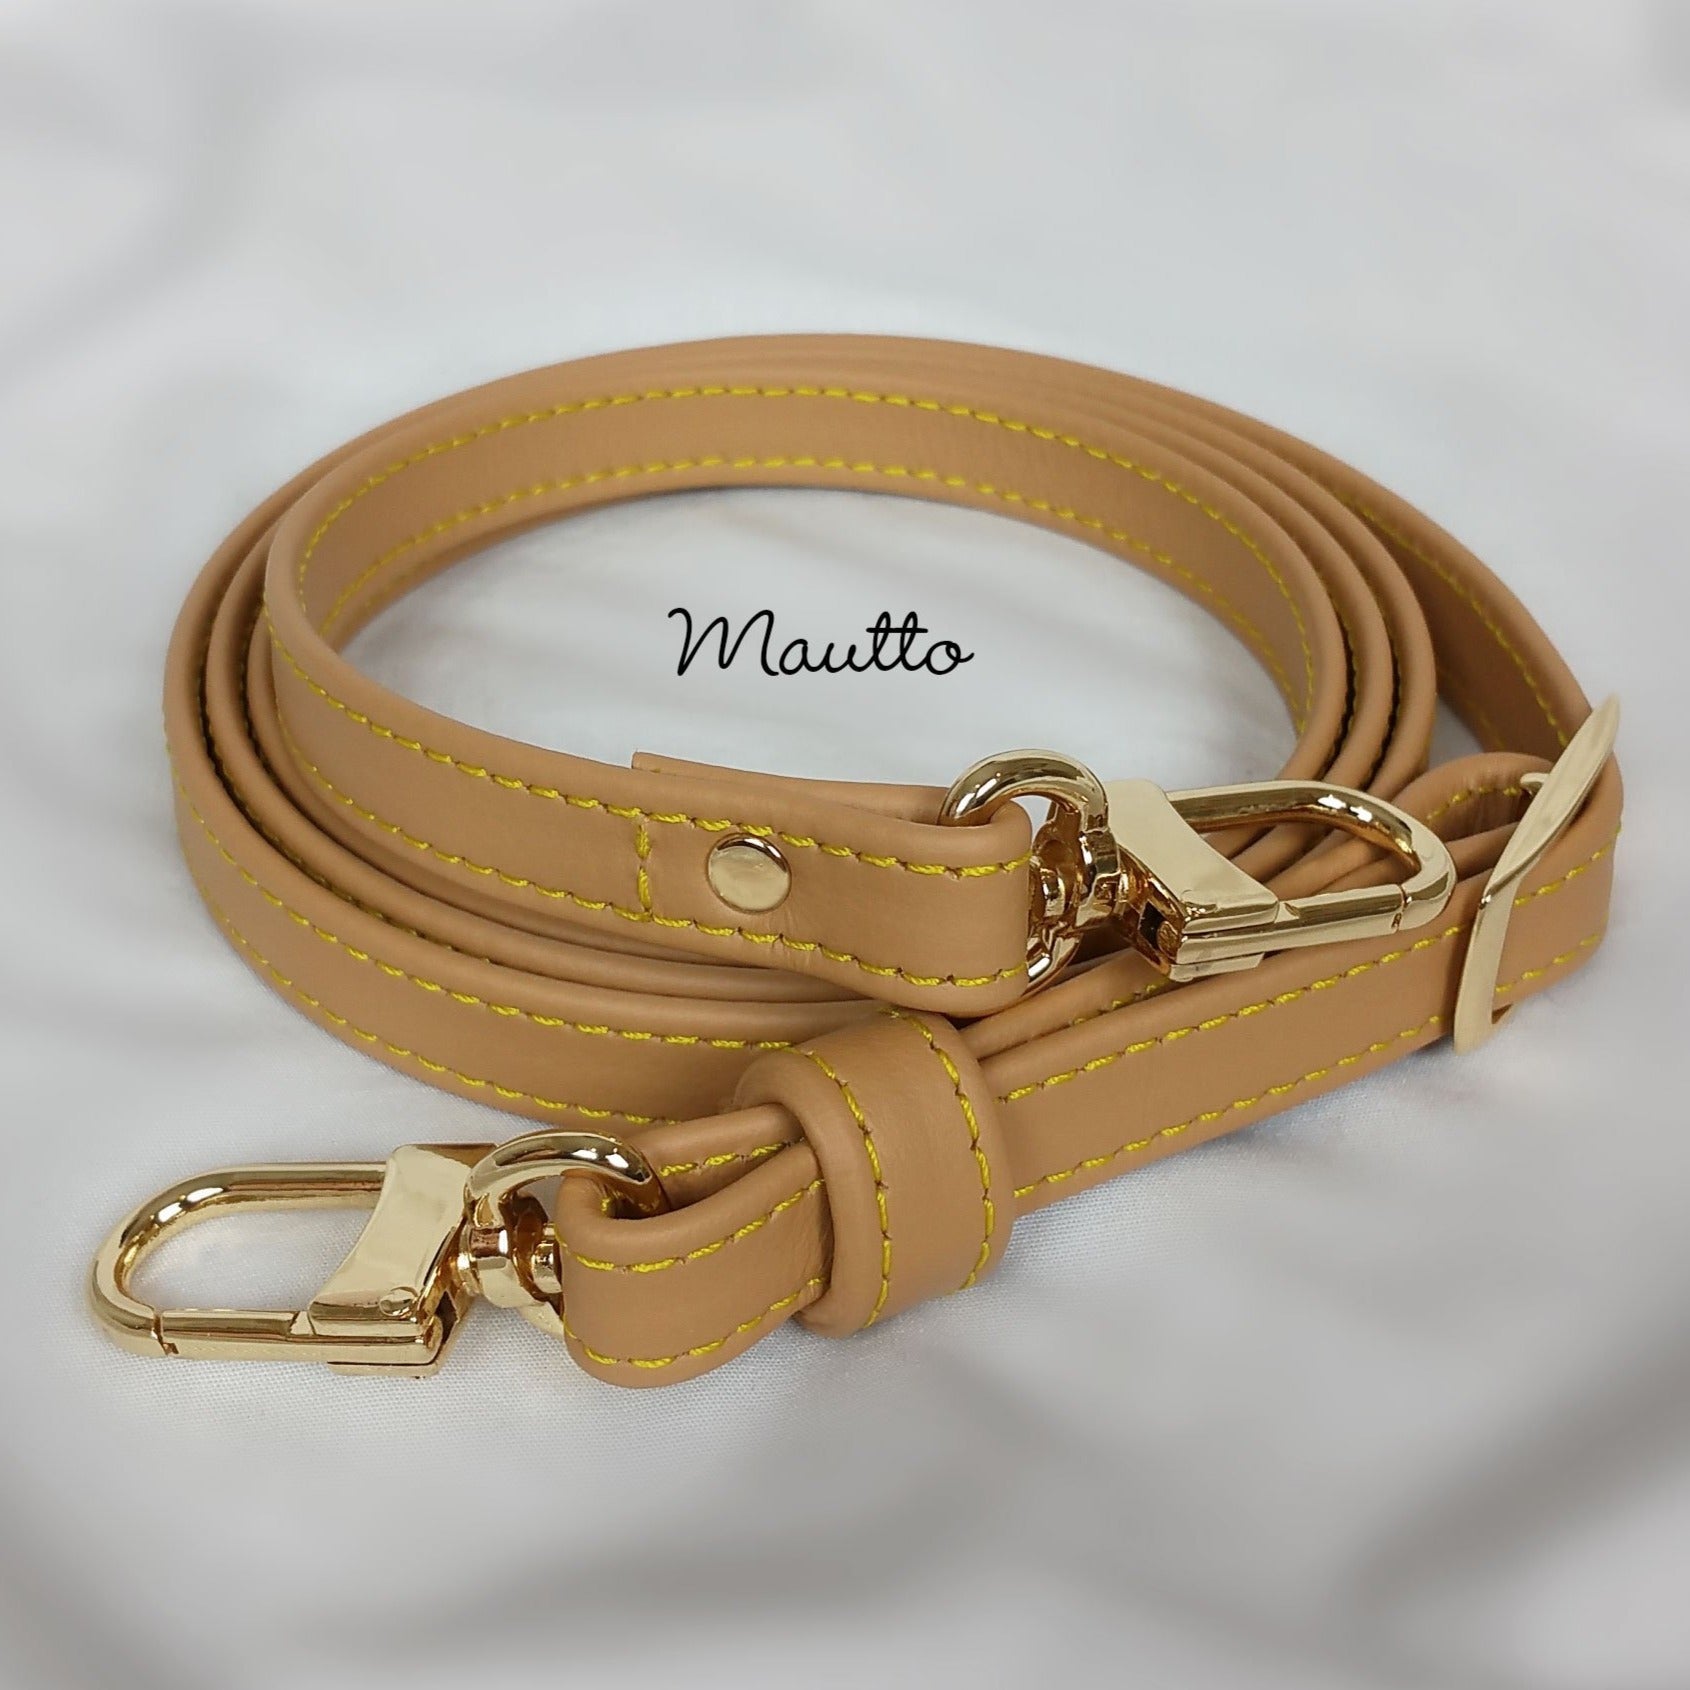 Light Tan Leather Strap with Yellow Stitching for Louis Vuitton (LV), Coach  & More - .75 Wide, Replacement Purse Straps & Handbag Accessories -  Leather, Chain & more